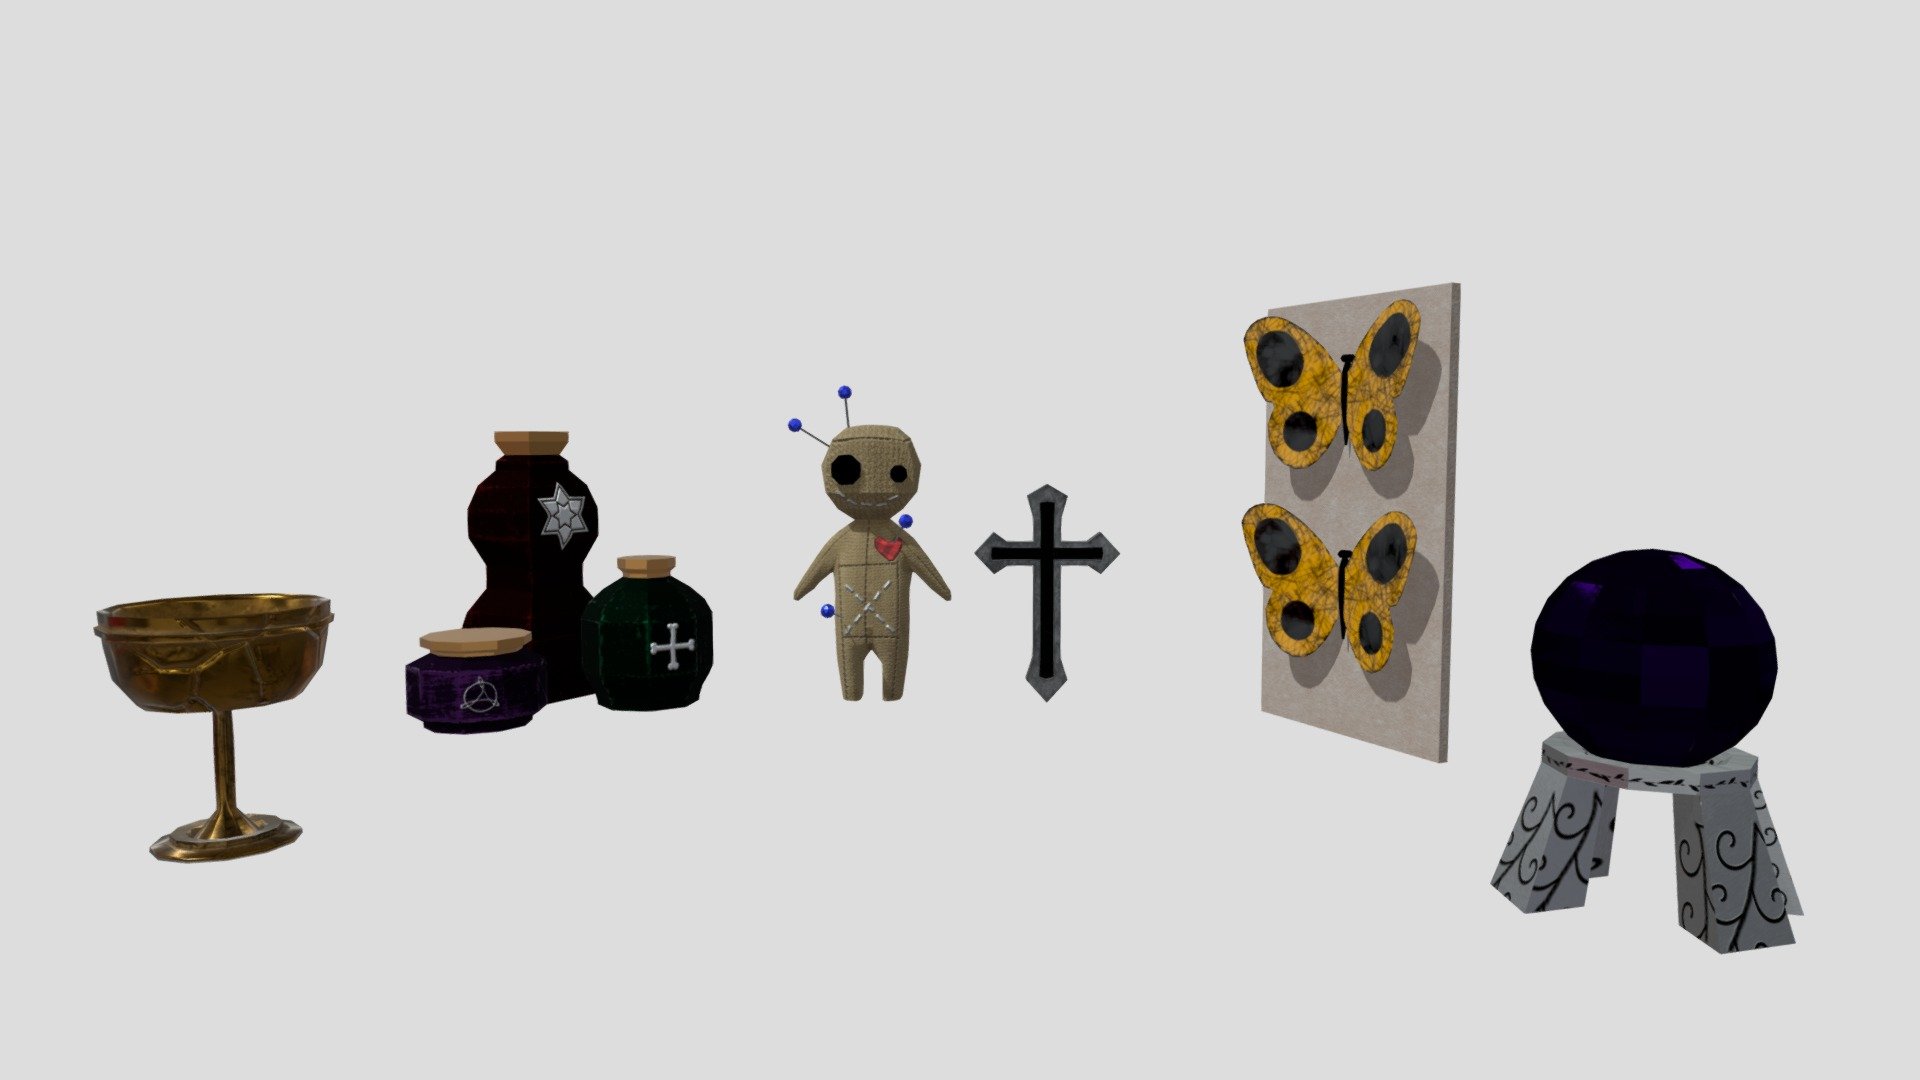 Learning to 3d model, UV, and texture. Theme is occult and the items I chose are: a voodoo doll, a crystal ball, pinned butterflies, a cross, a few potion bottles, and a goblet. 

Programs used: Maya (3d model and UV) and Substance Painter (texture) - 6 Props - Download Free 3D model by JordanPowell (@jpowell) 3d model